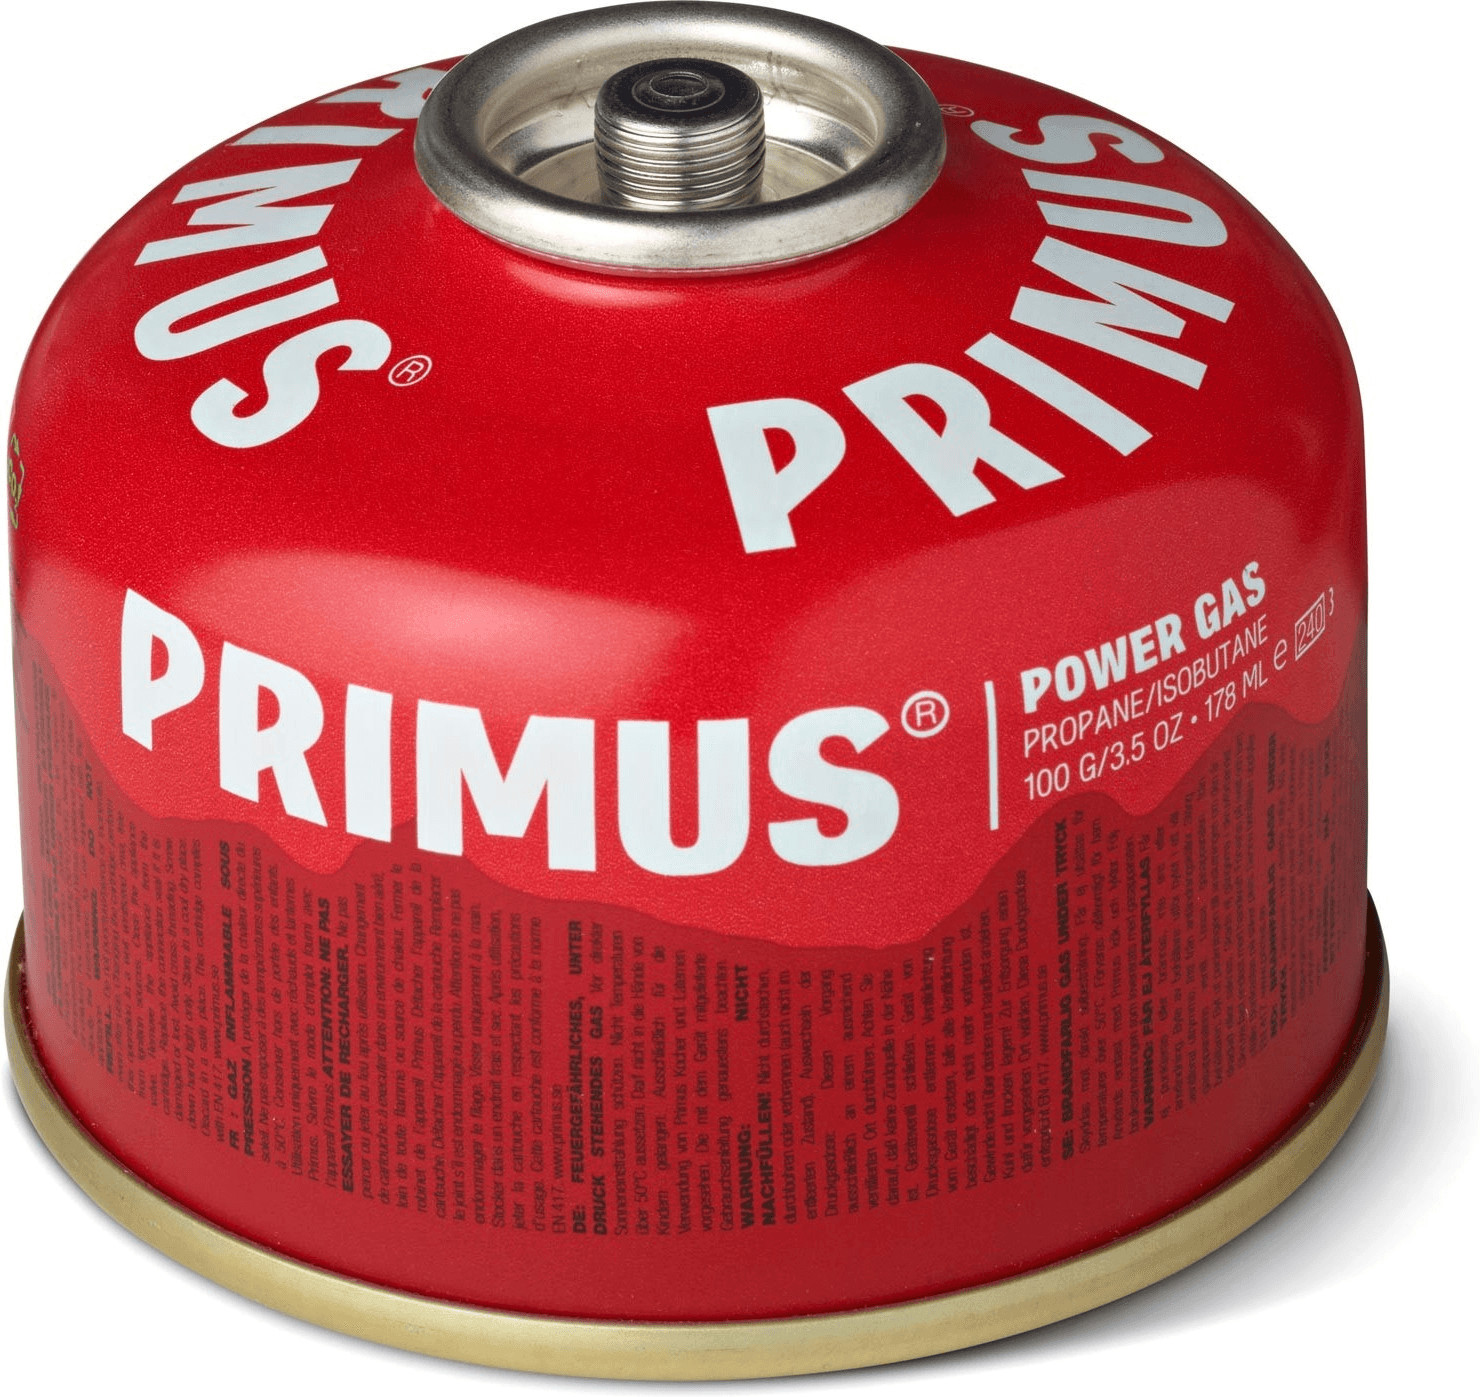 Photos - Gas Canister Primus Outdoor  Power Gas  (100 g)